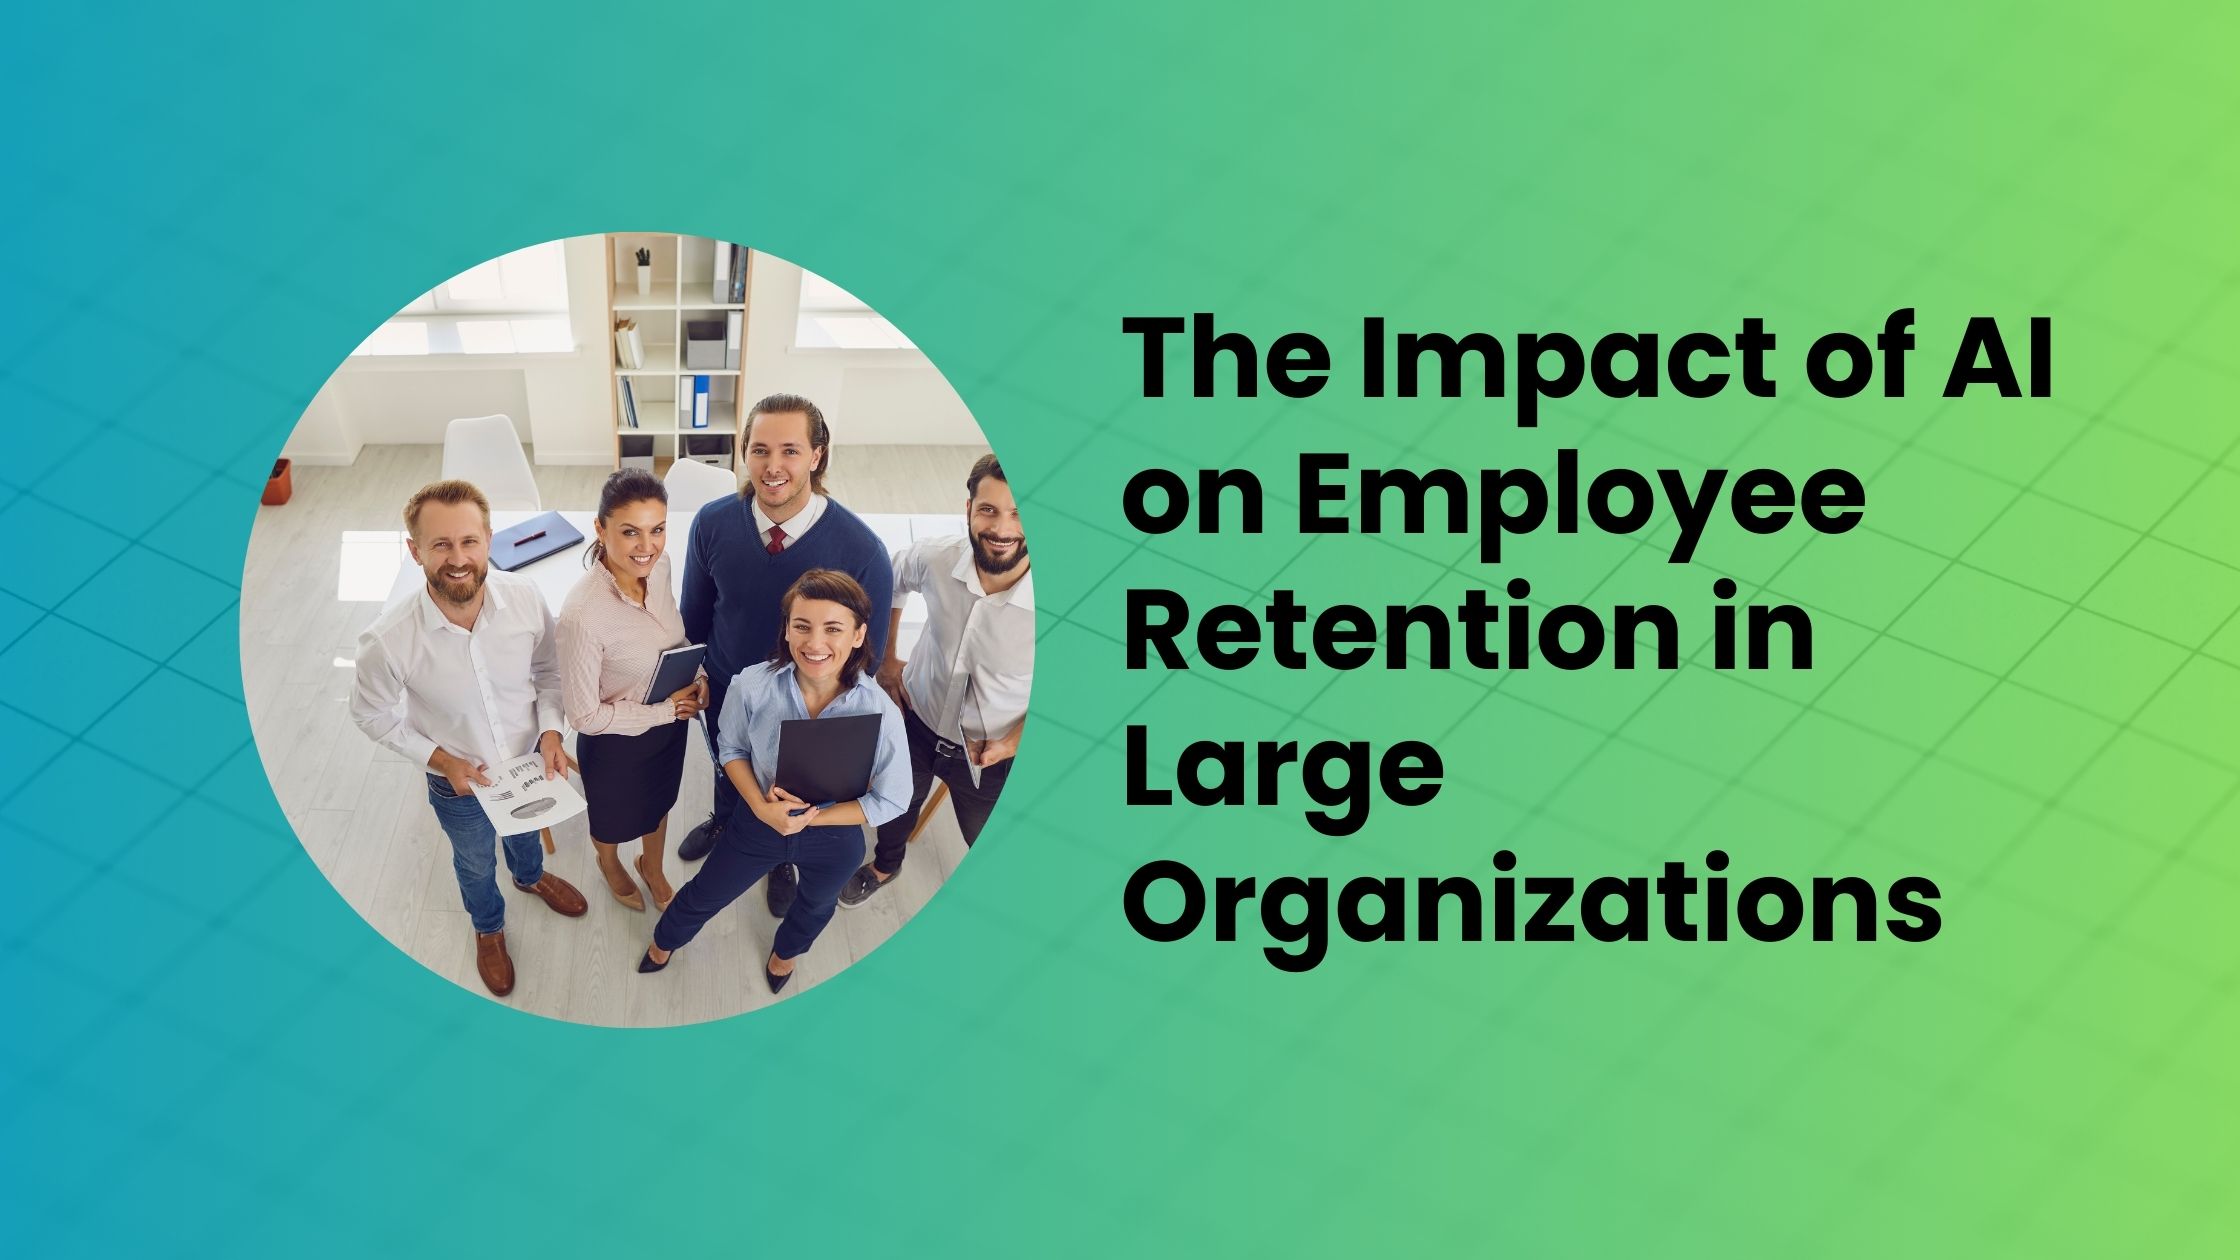 The Impact of AI on Employee Retention in Large Organizations